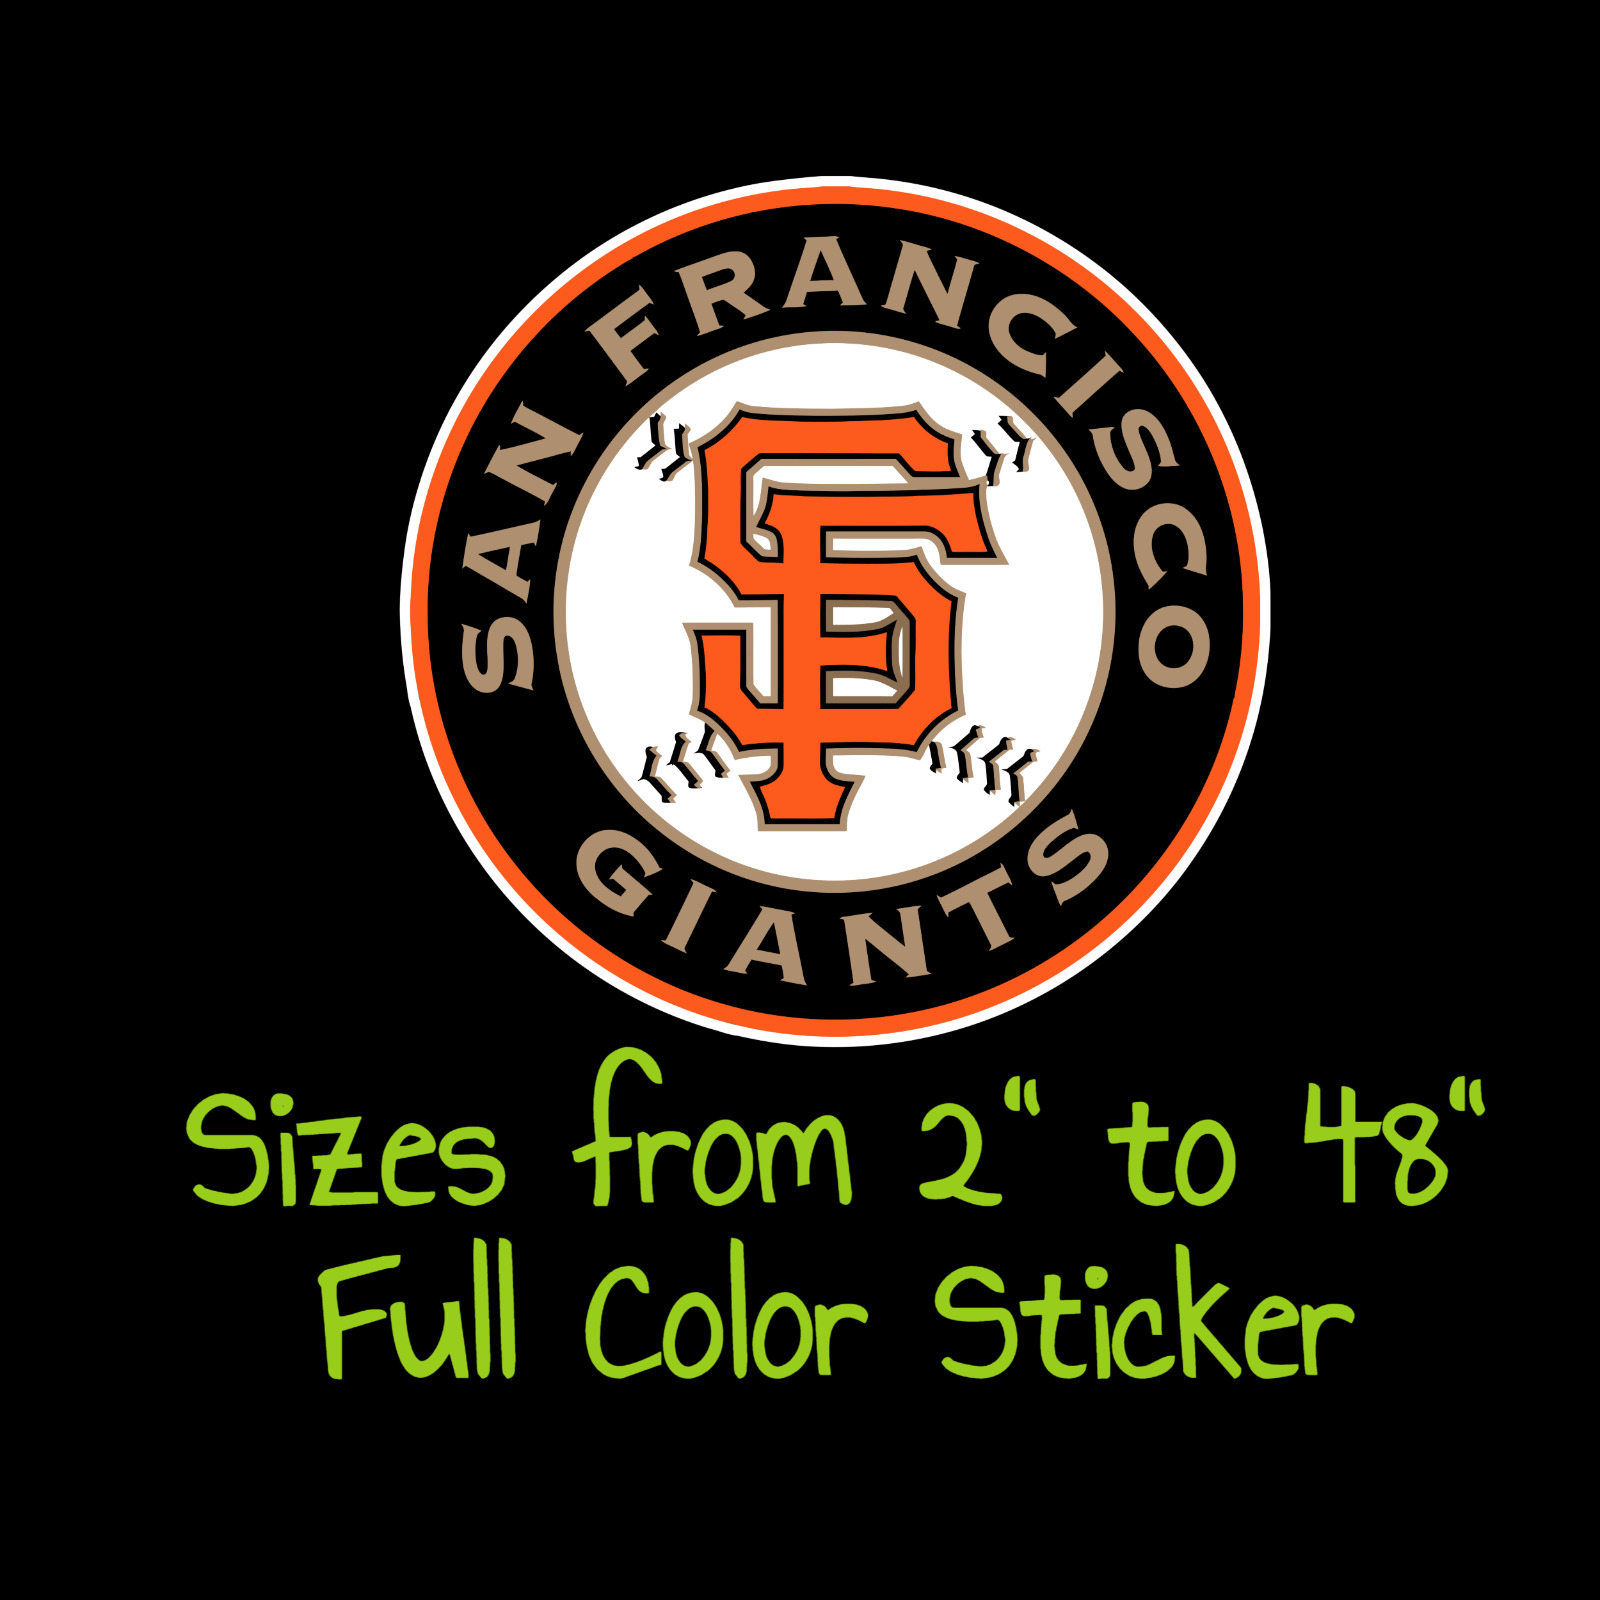 San Francisco Giants Full Color Vinyl Decal | Hydroflask decal Cornhole decal 1